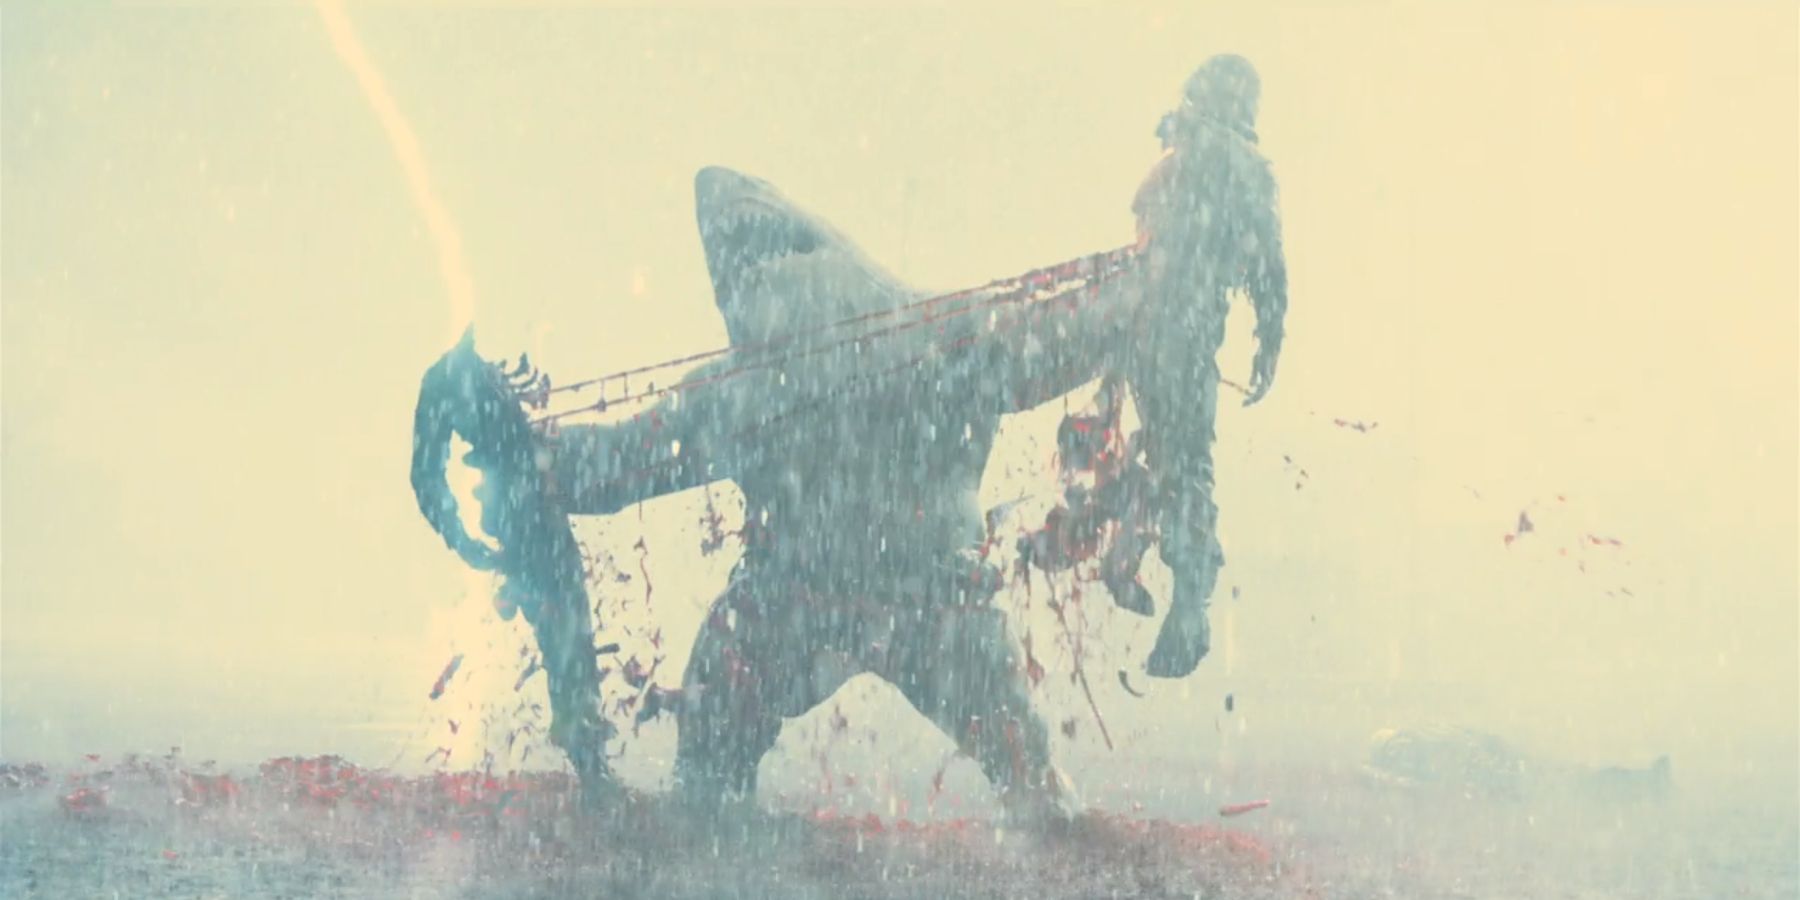 King Shark tearing a man in half while lightning strikes behind him in James Gunn's The Suicide Squad